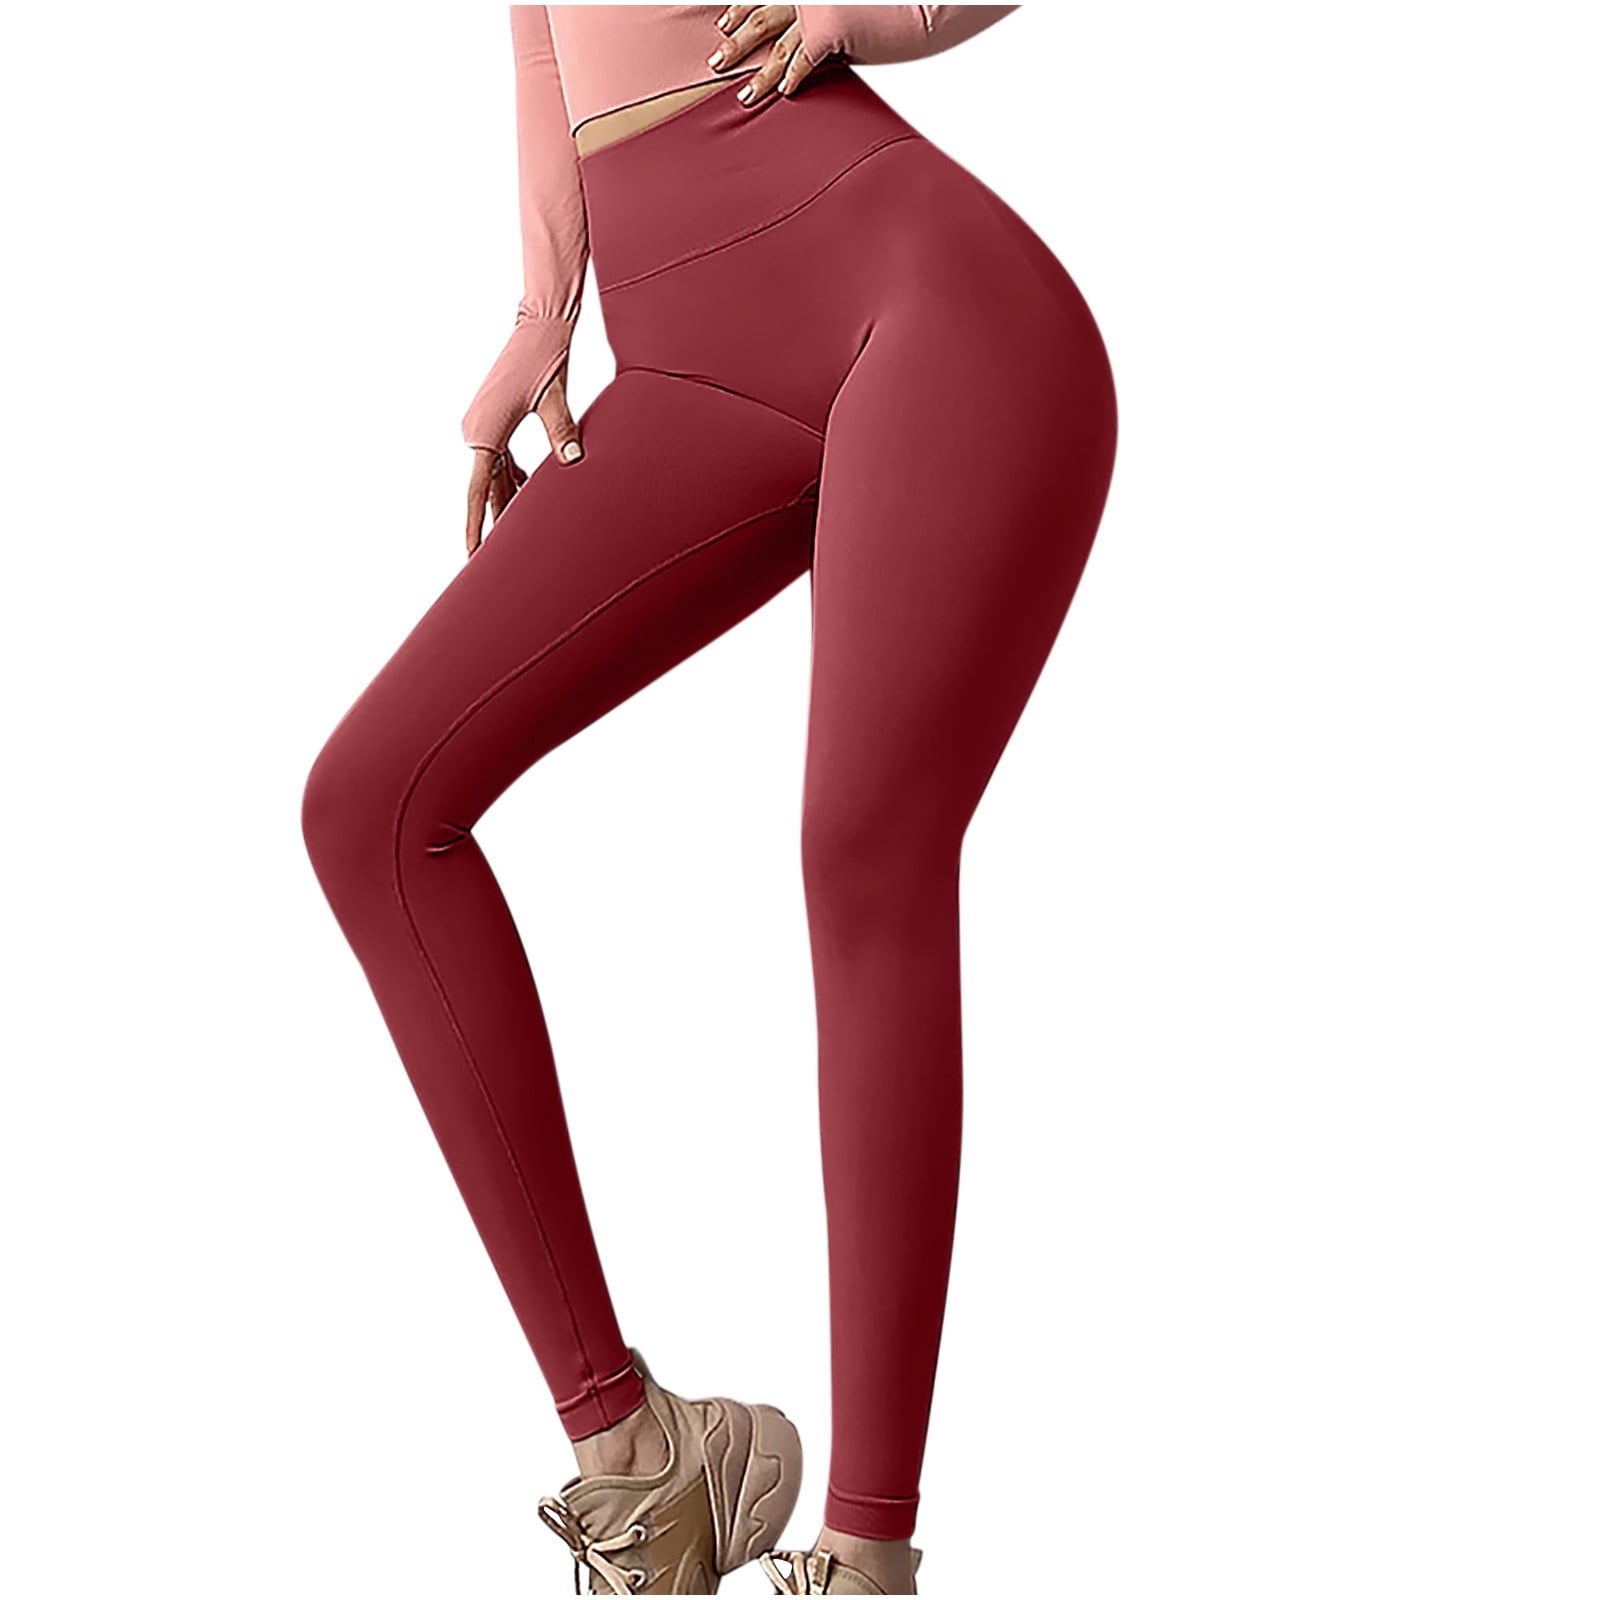 KIJBLAE Women's Bottoms Yoga Pants For Girls Comfy Lounge Casual Pants  Fashion Full Length Trousers Solid Color Hot Pink XL 